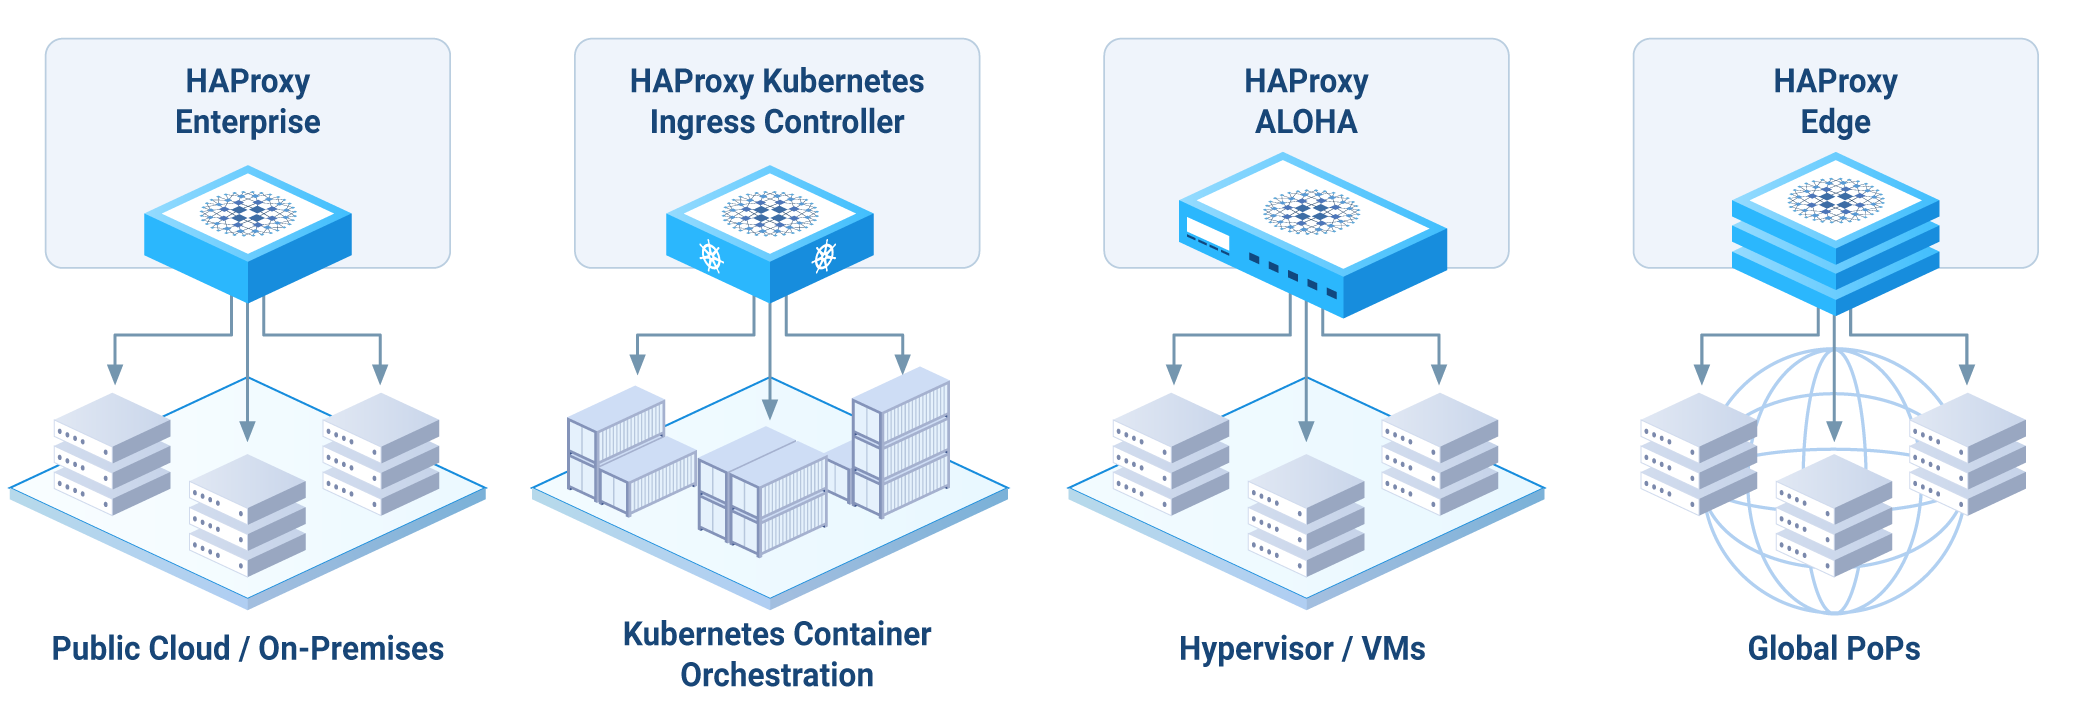 haproxy-fusion-product-integrations